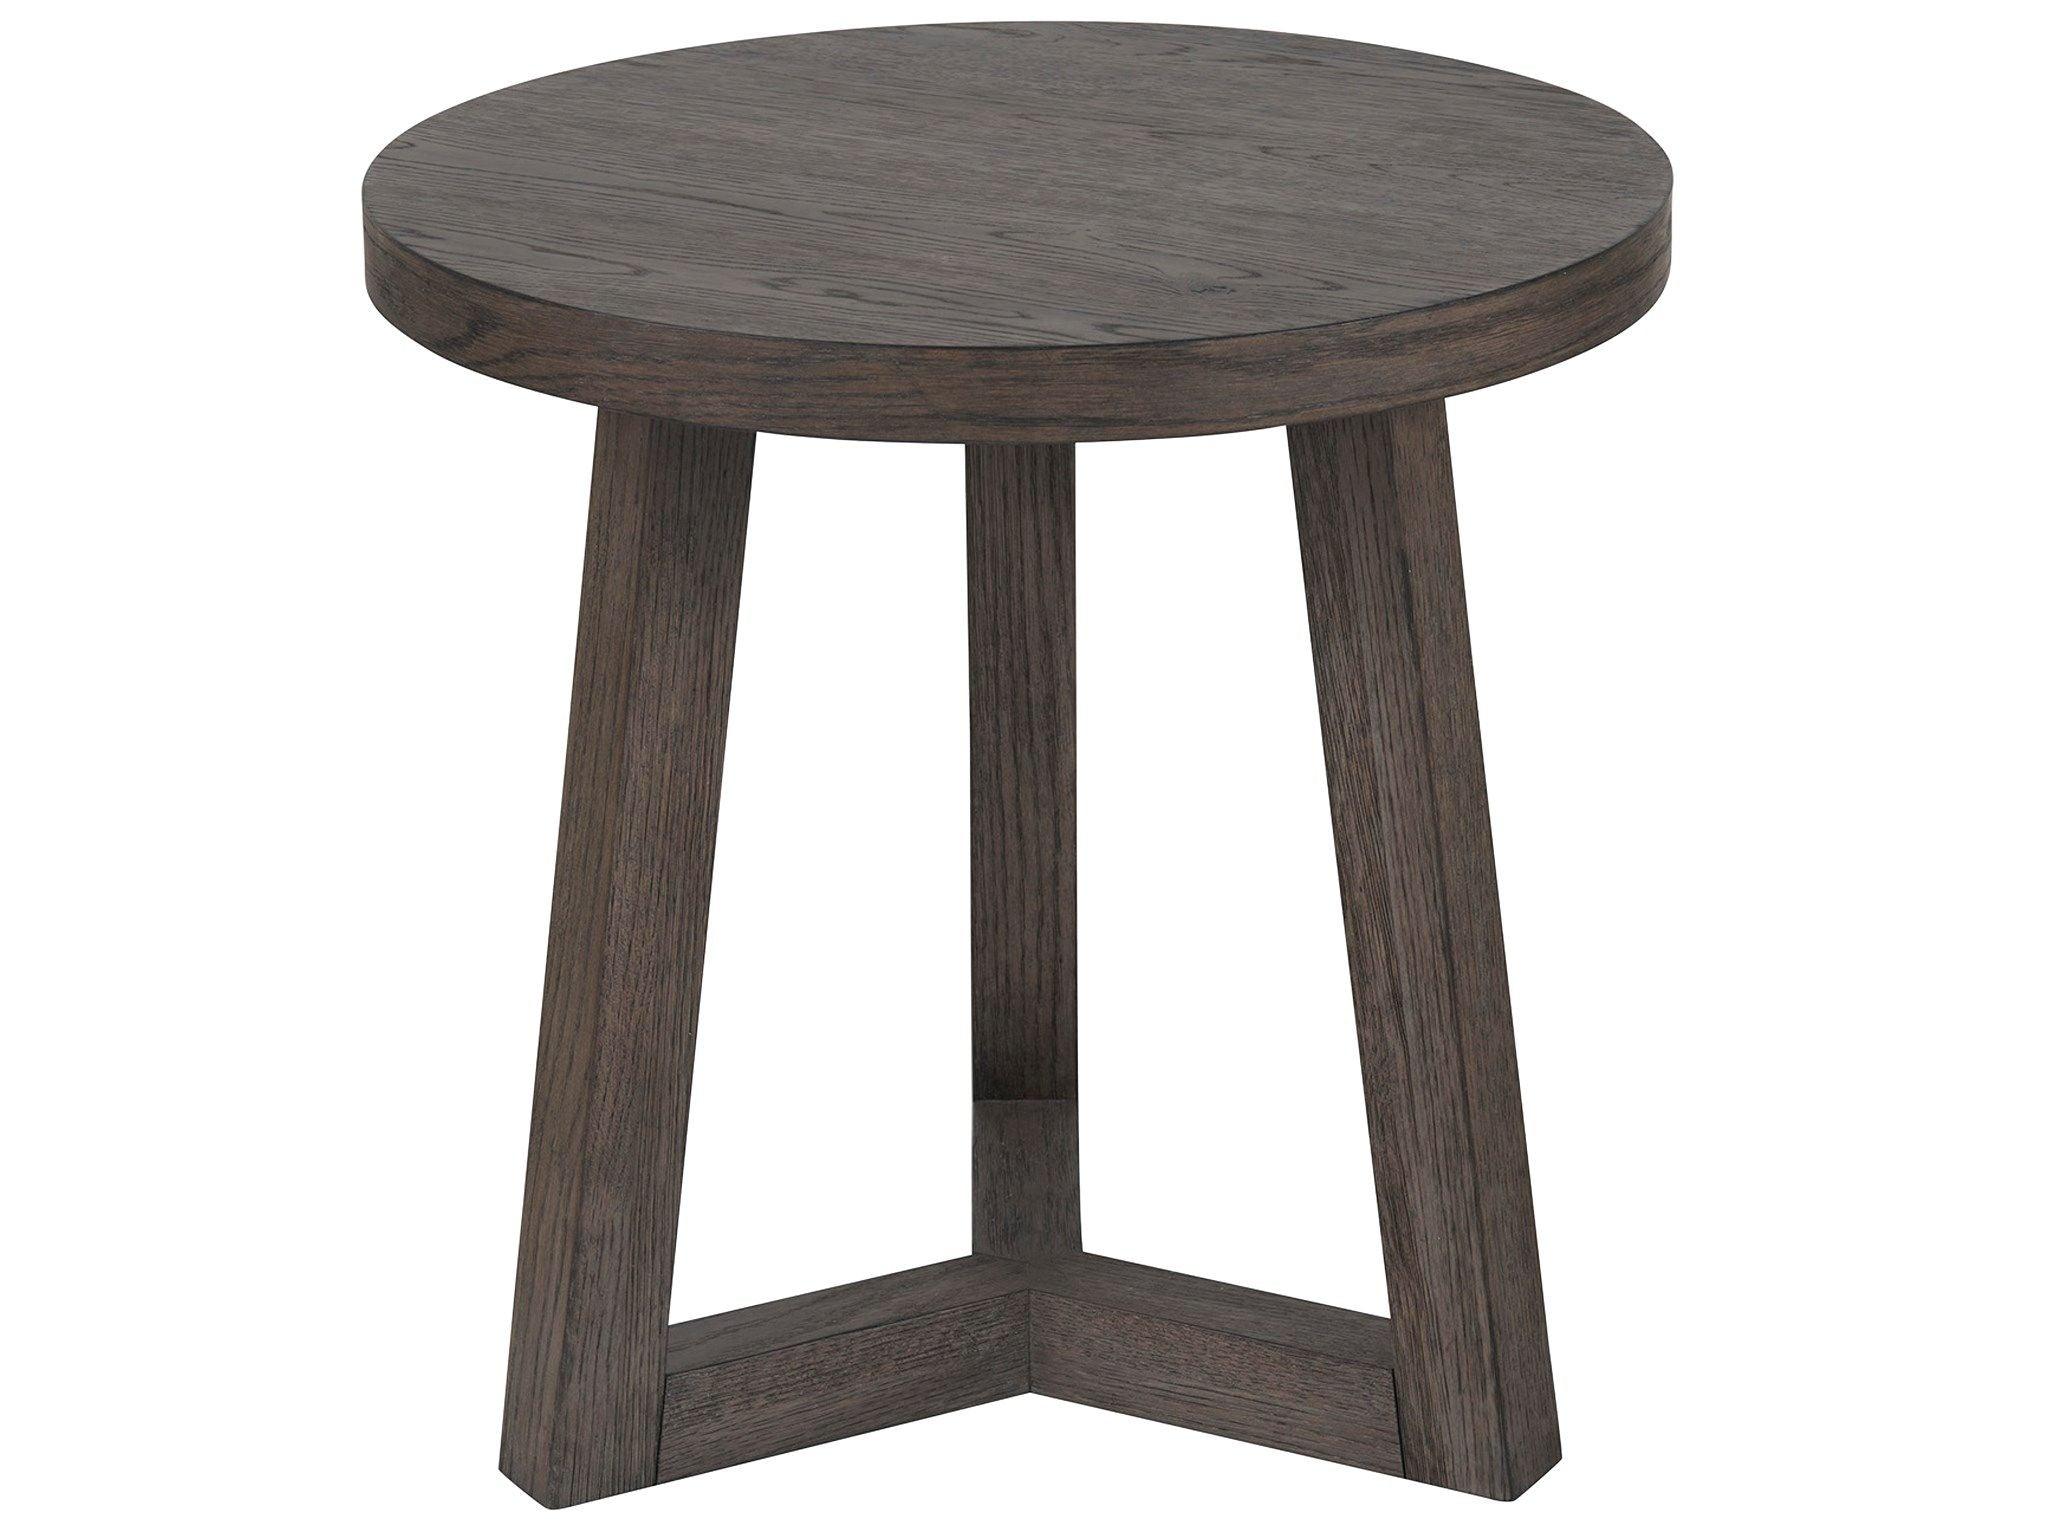 Universal Furniture - New Modern - Muse Bunching Table Small - Dark Brown - 5th Avenue Furniture